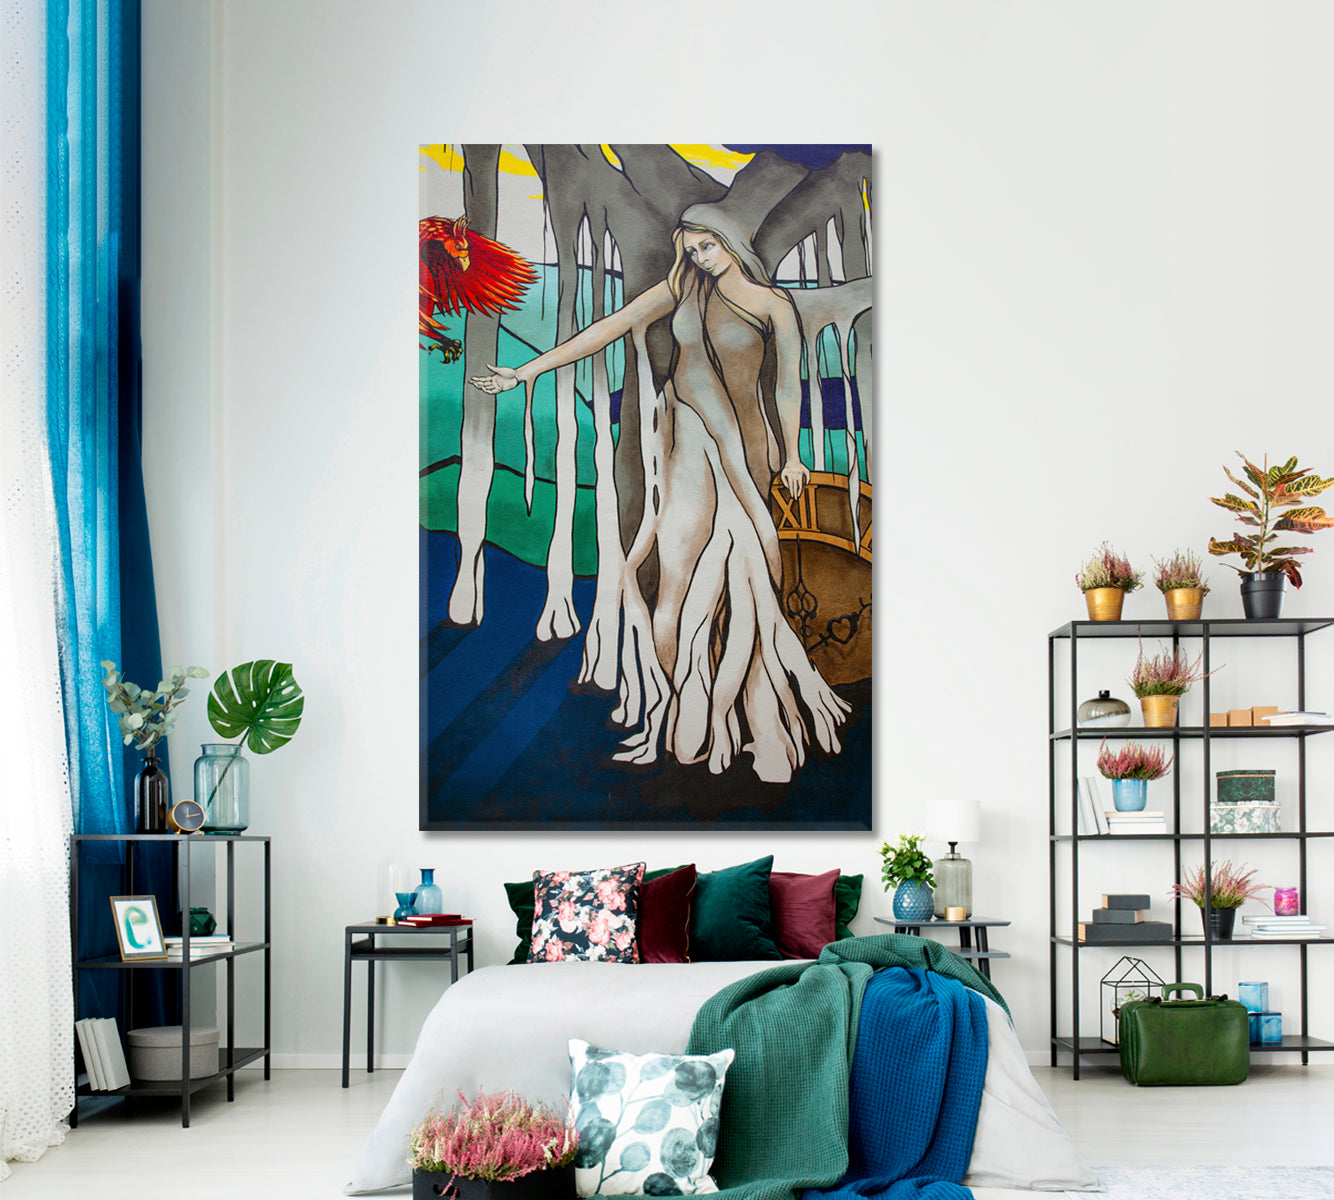 PLANET JANINE |  Woman Tree Abstract Surreal Modern Canvas Print - Vertical Surreal Fantasy Large Art Print Décor Artesty   